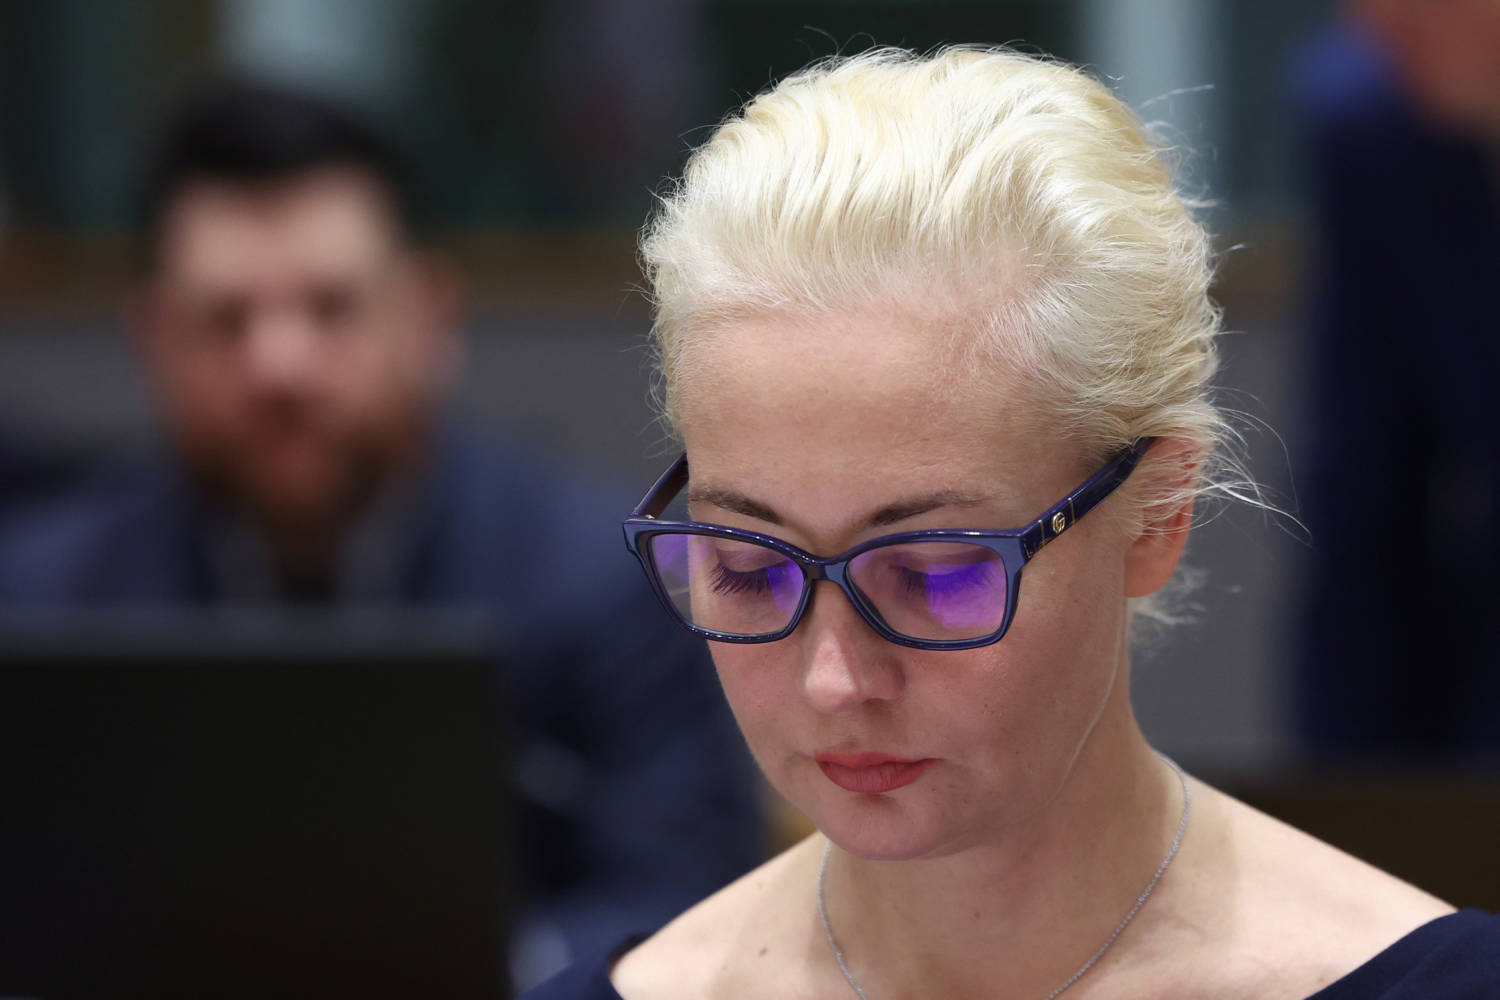 Yulia Navalnaya, The Widow Of Alexei Navalny, Takes Part In A Meeting Of Eu Foreign Ministers In Brussels